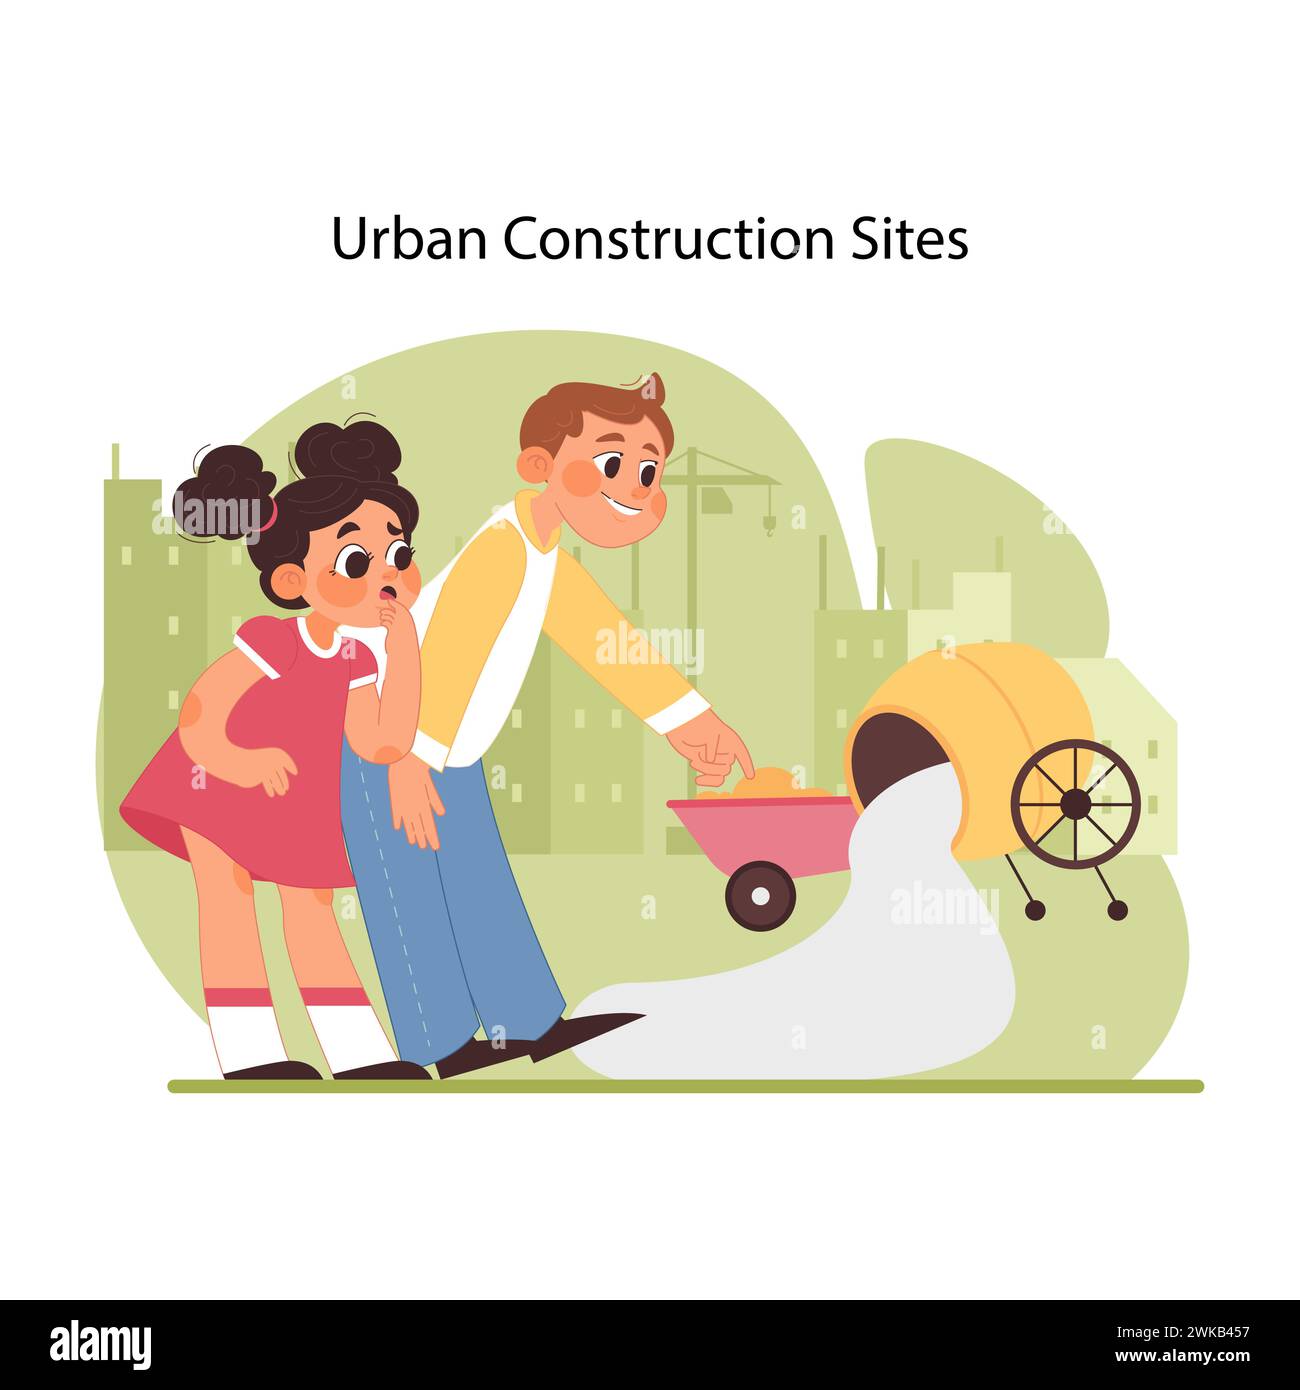 Construction playtime warning. Two curious children observing concrete mixer, mimicking work at urban construction site, unaware of potential dangers around them. Preventing injuries. Flat vector Stock Vector